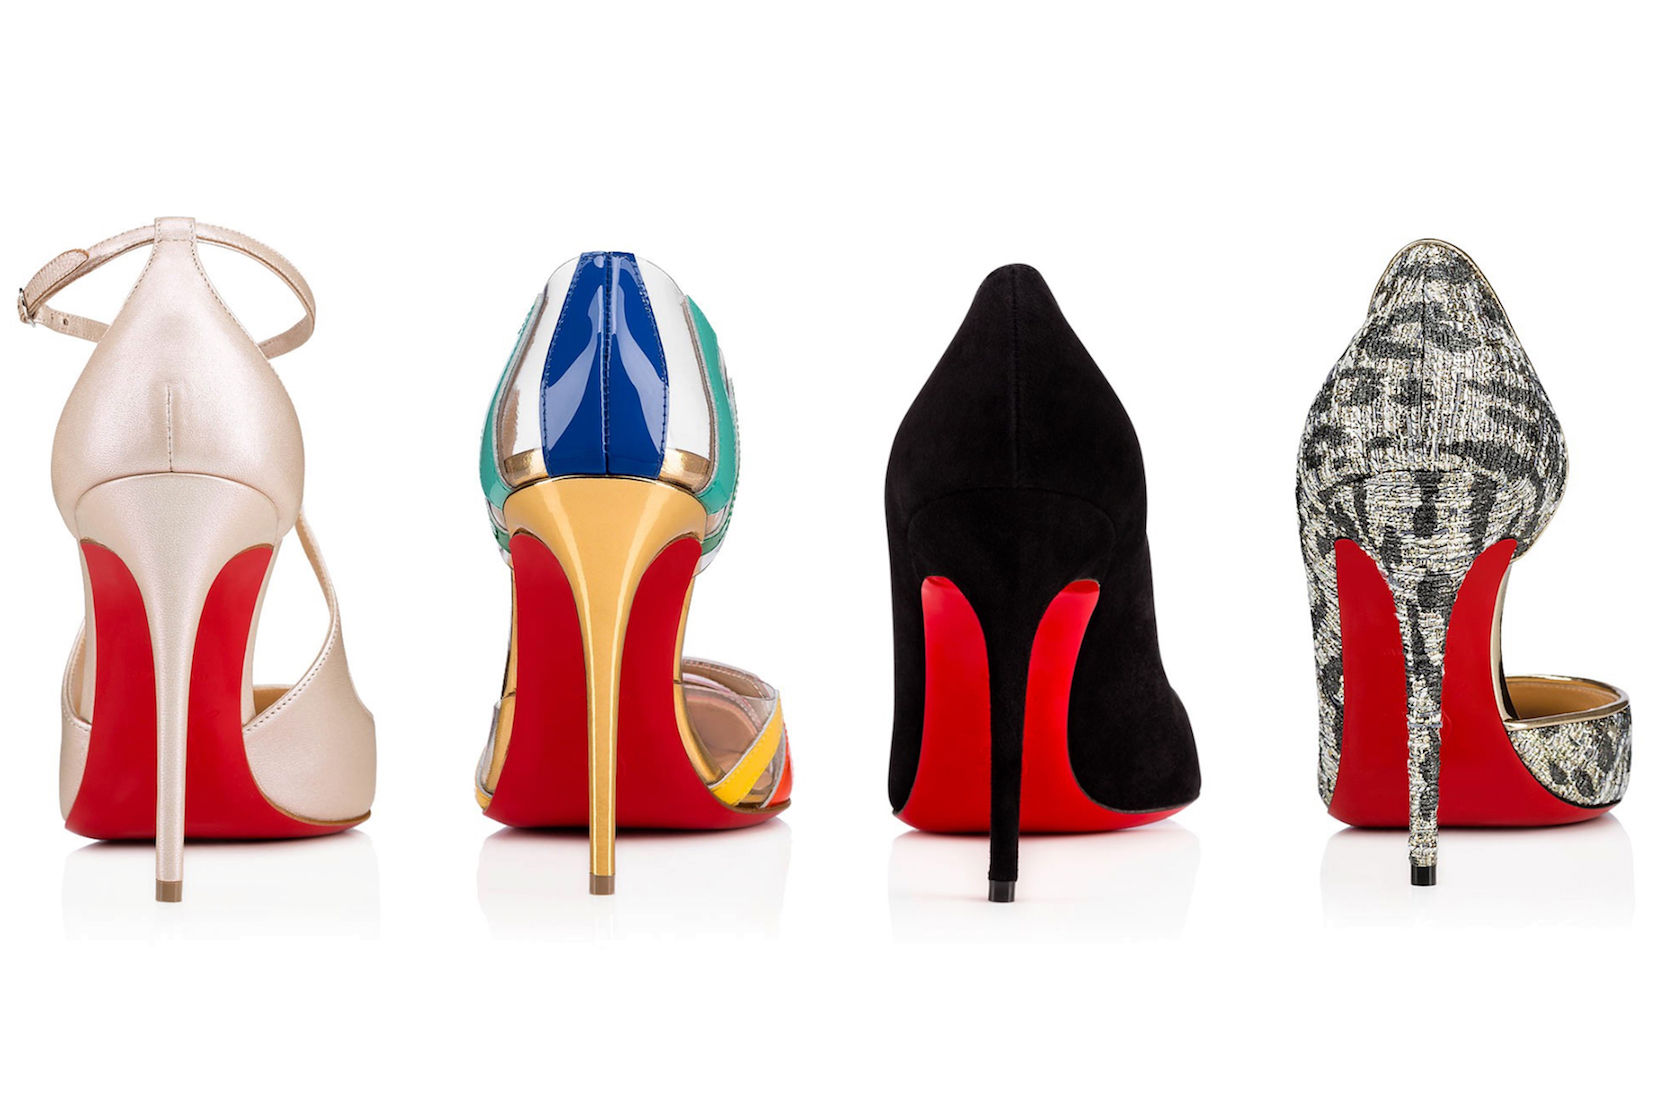 Why is it expensive: The Christian Louboutin red